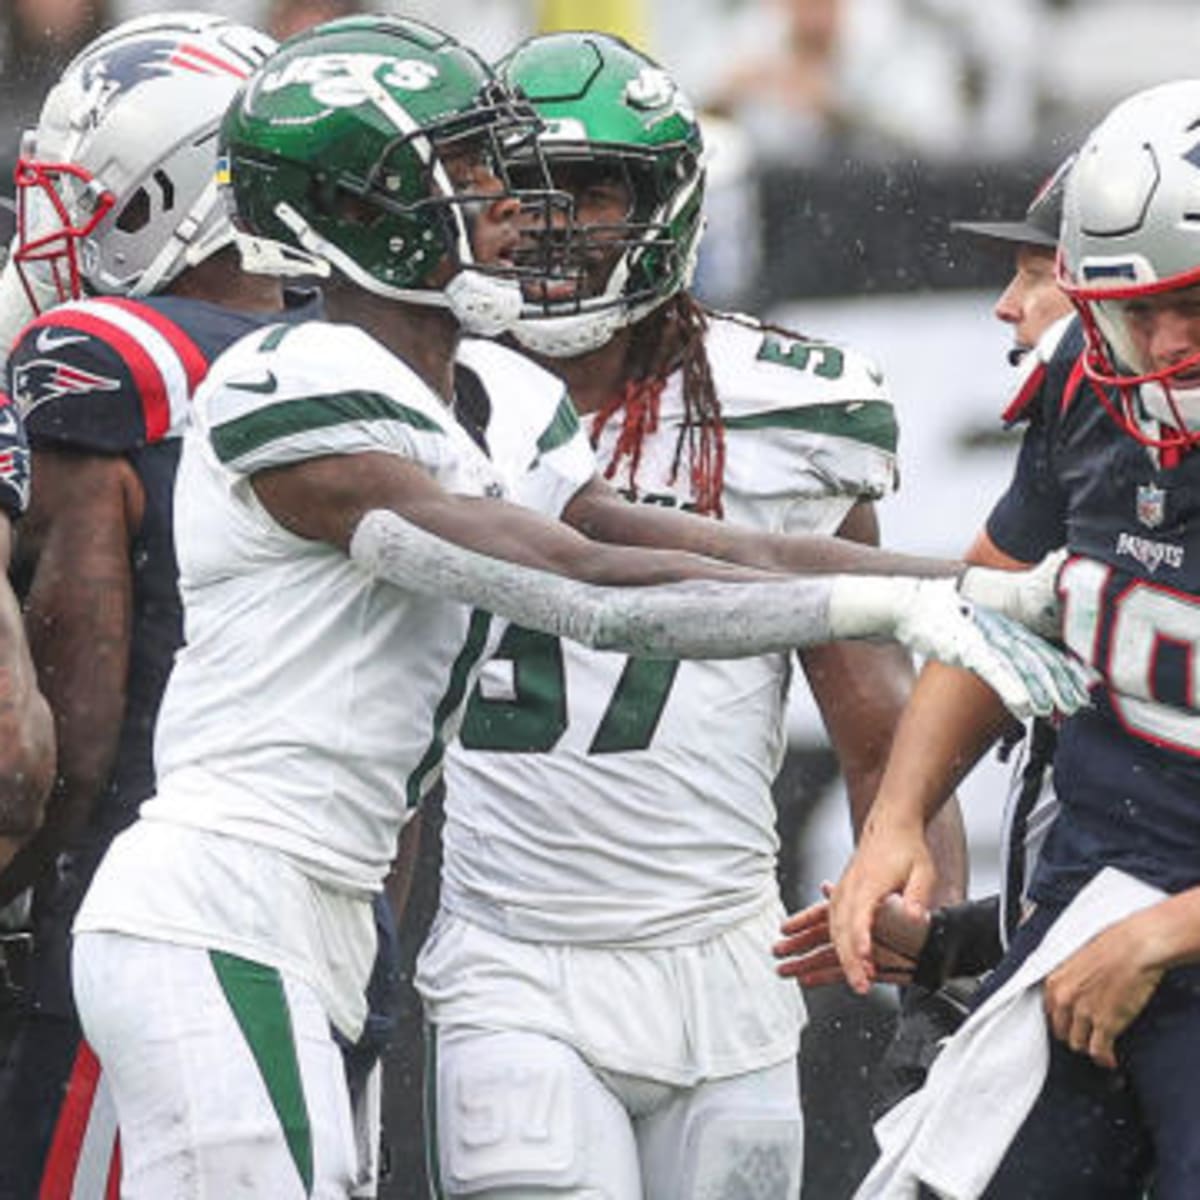 Bengals get first win of 2019 season by beating Jets - Sports Illustrated